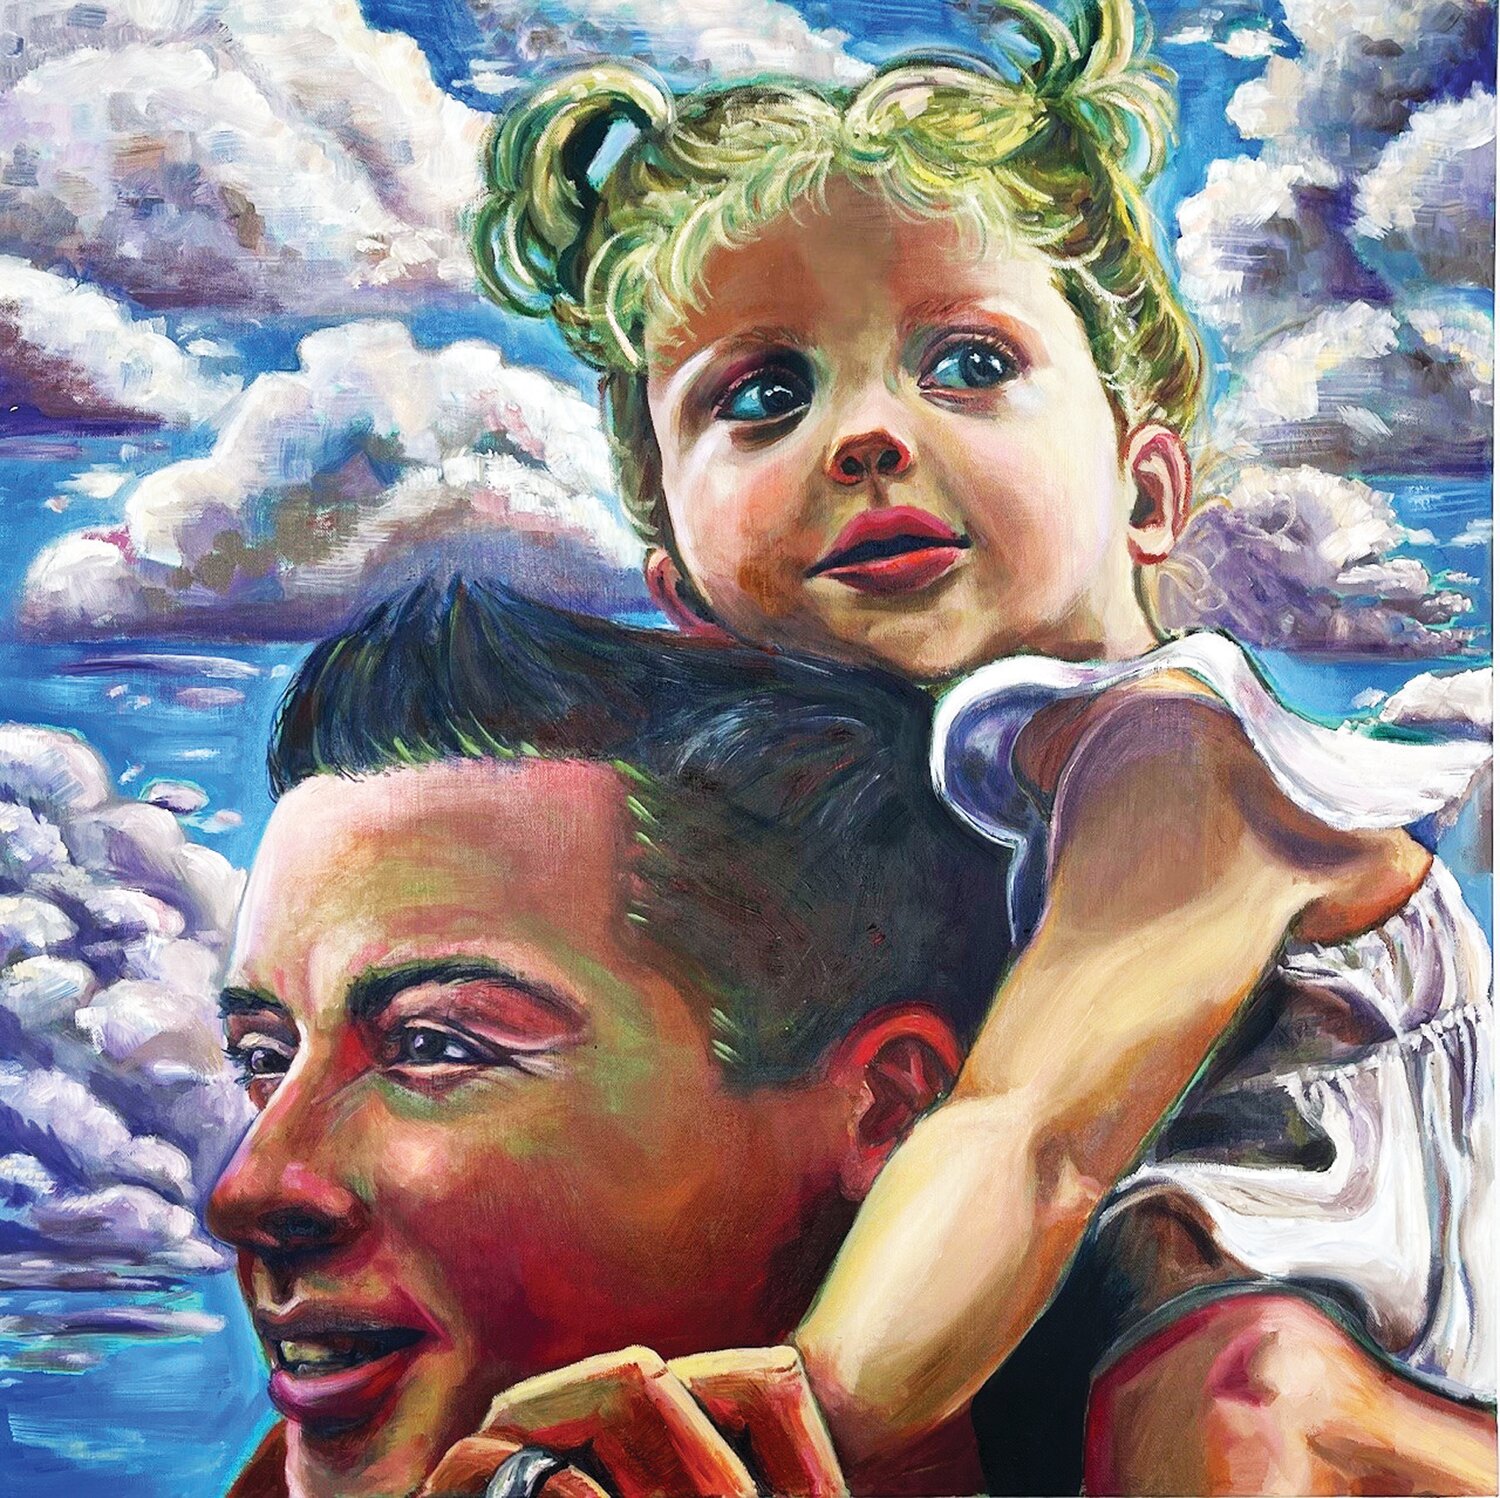 “On Top of the World” is an oil on canvas by Council Rock South student Annabelle Schu.